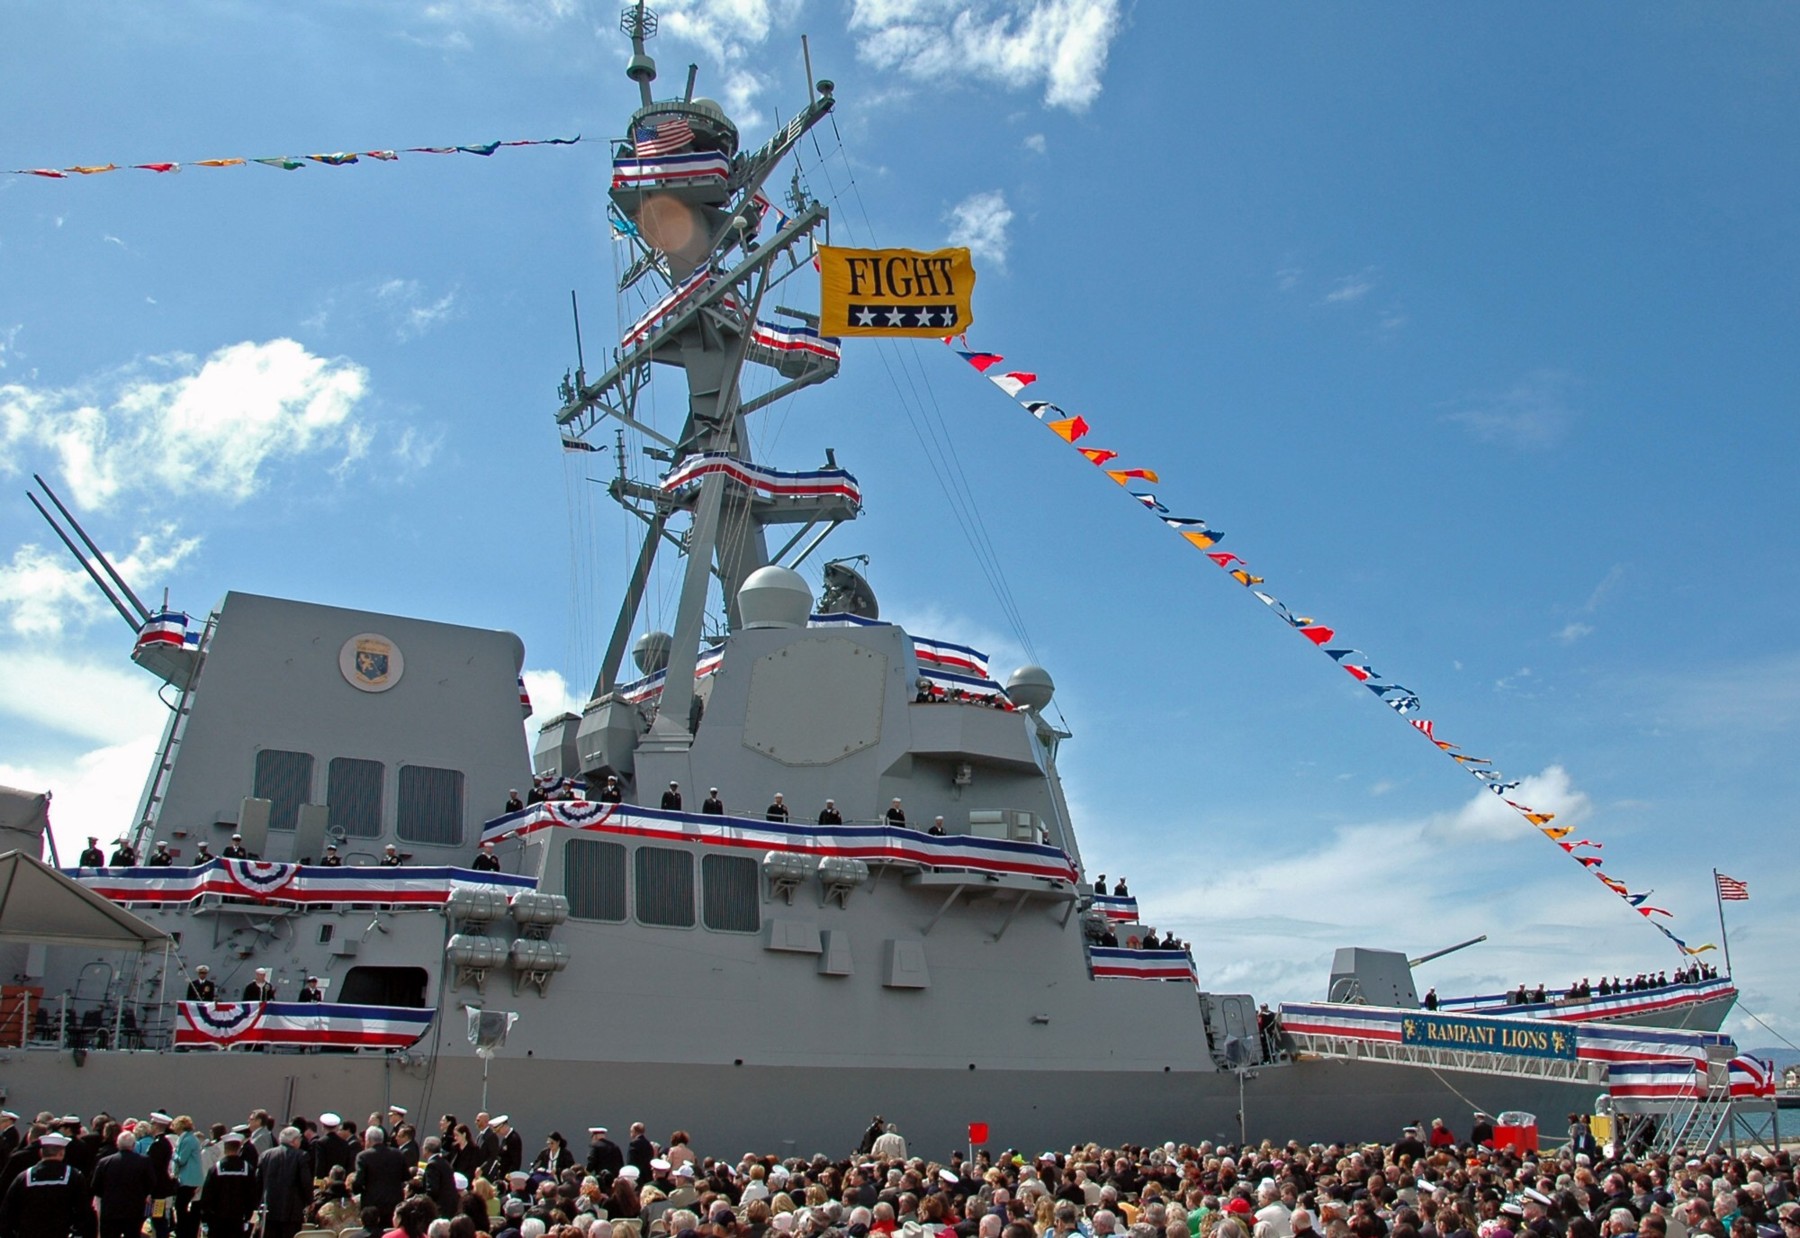 ddg-110 uss dewey arleigh burke class guided missile destroyer aegis us navy commissioning ceremony seal beach 58